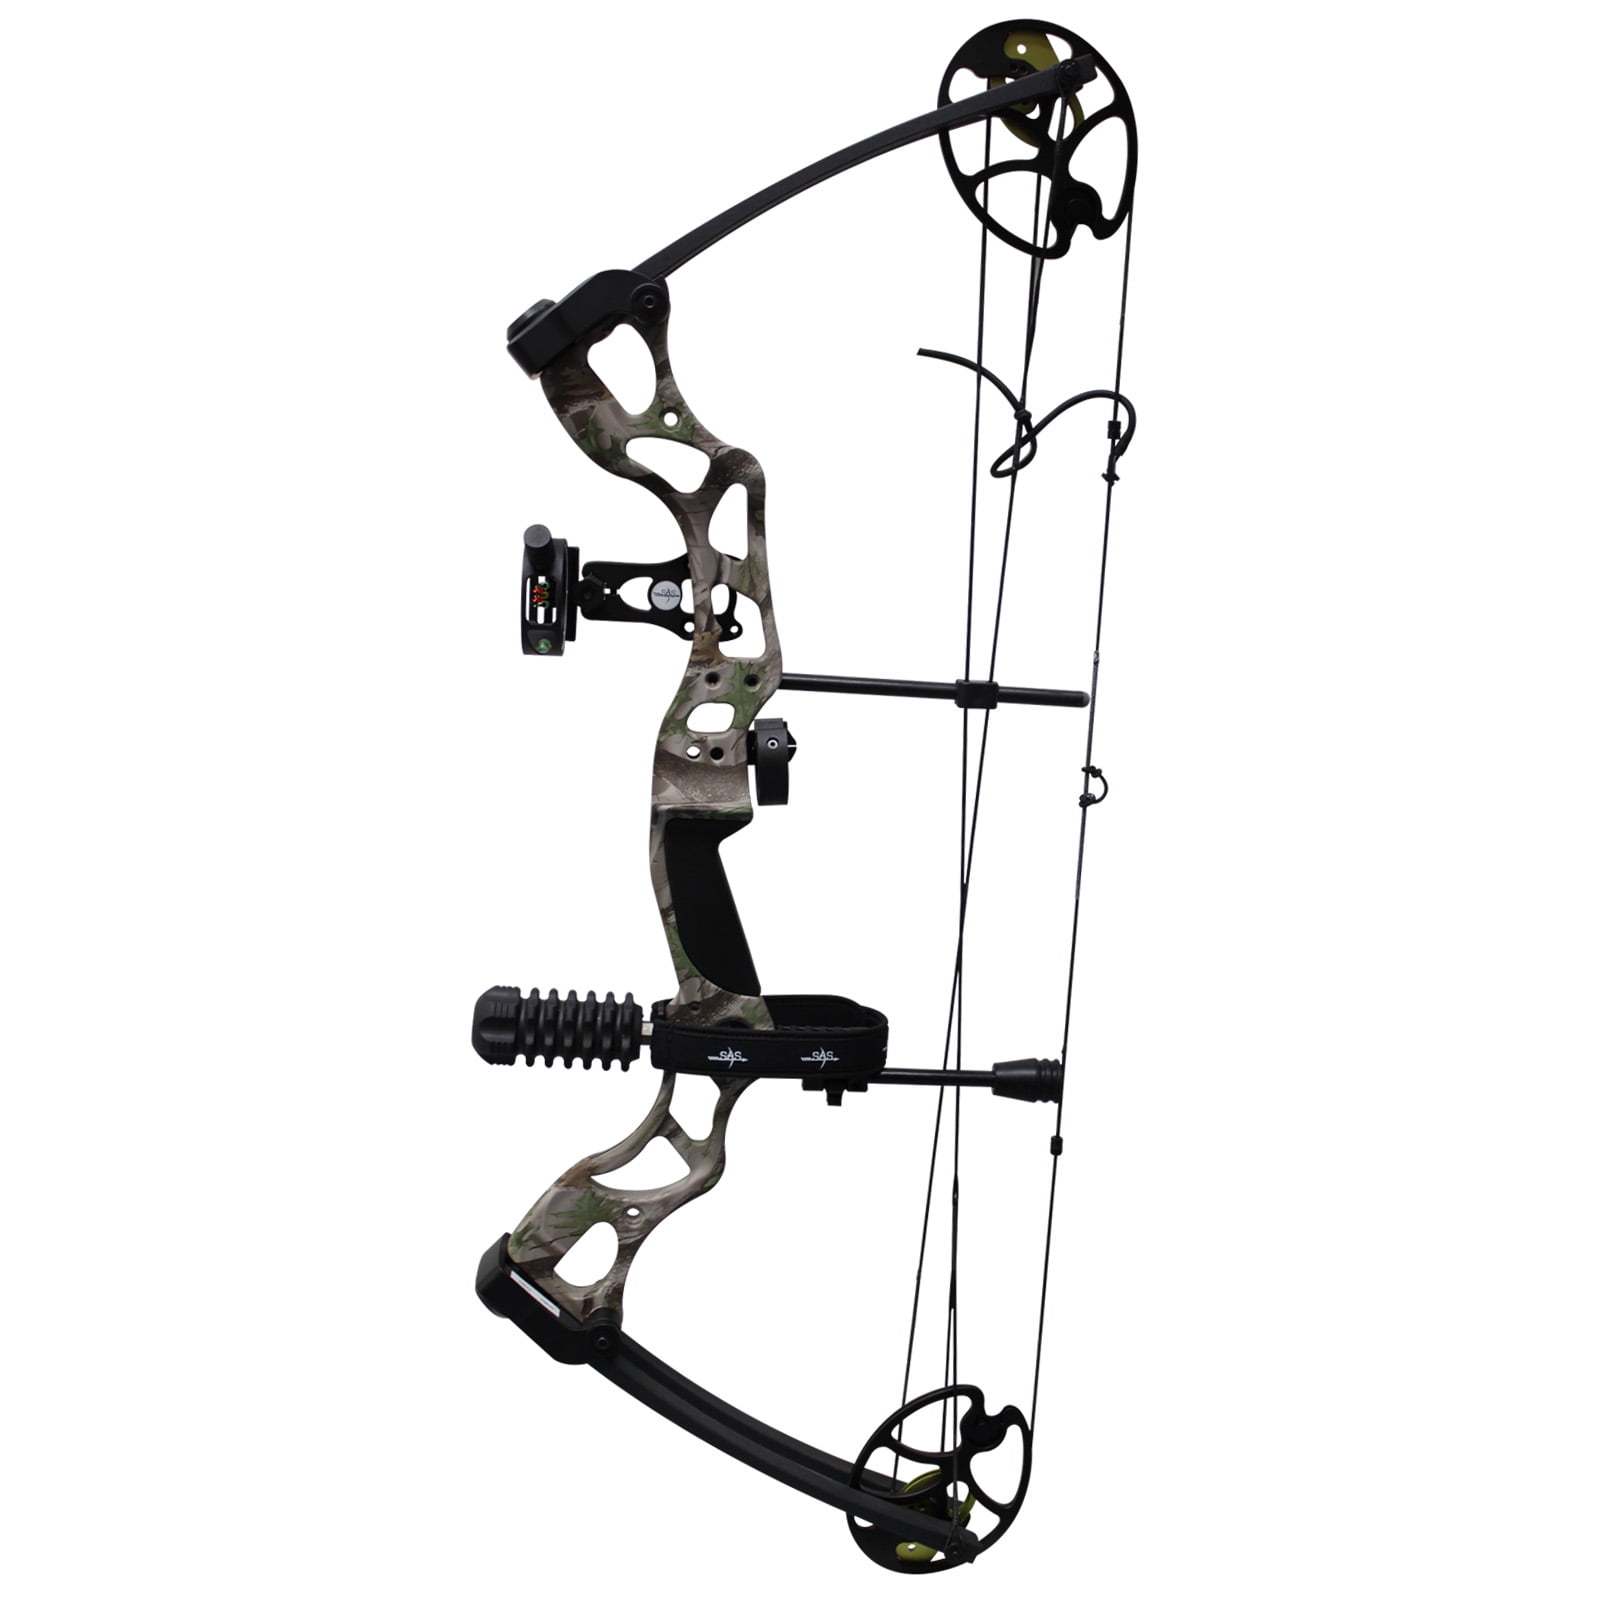 SAS Feud 25-70 Lbs Compound Bow Pro Package Fully Loaded Hunting Ready Combo 